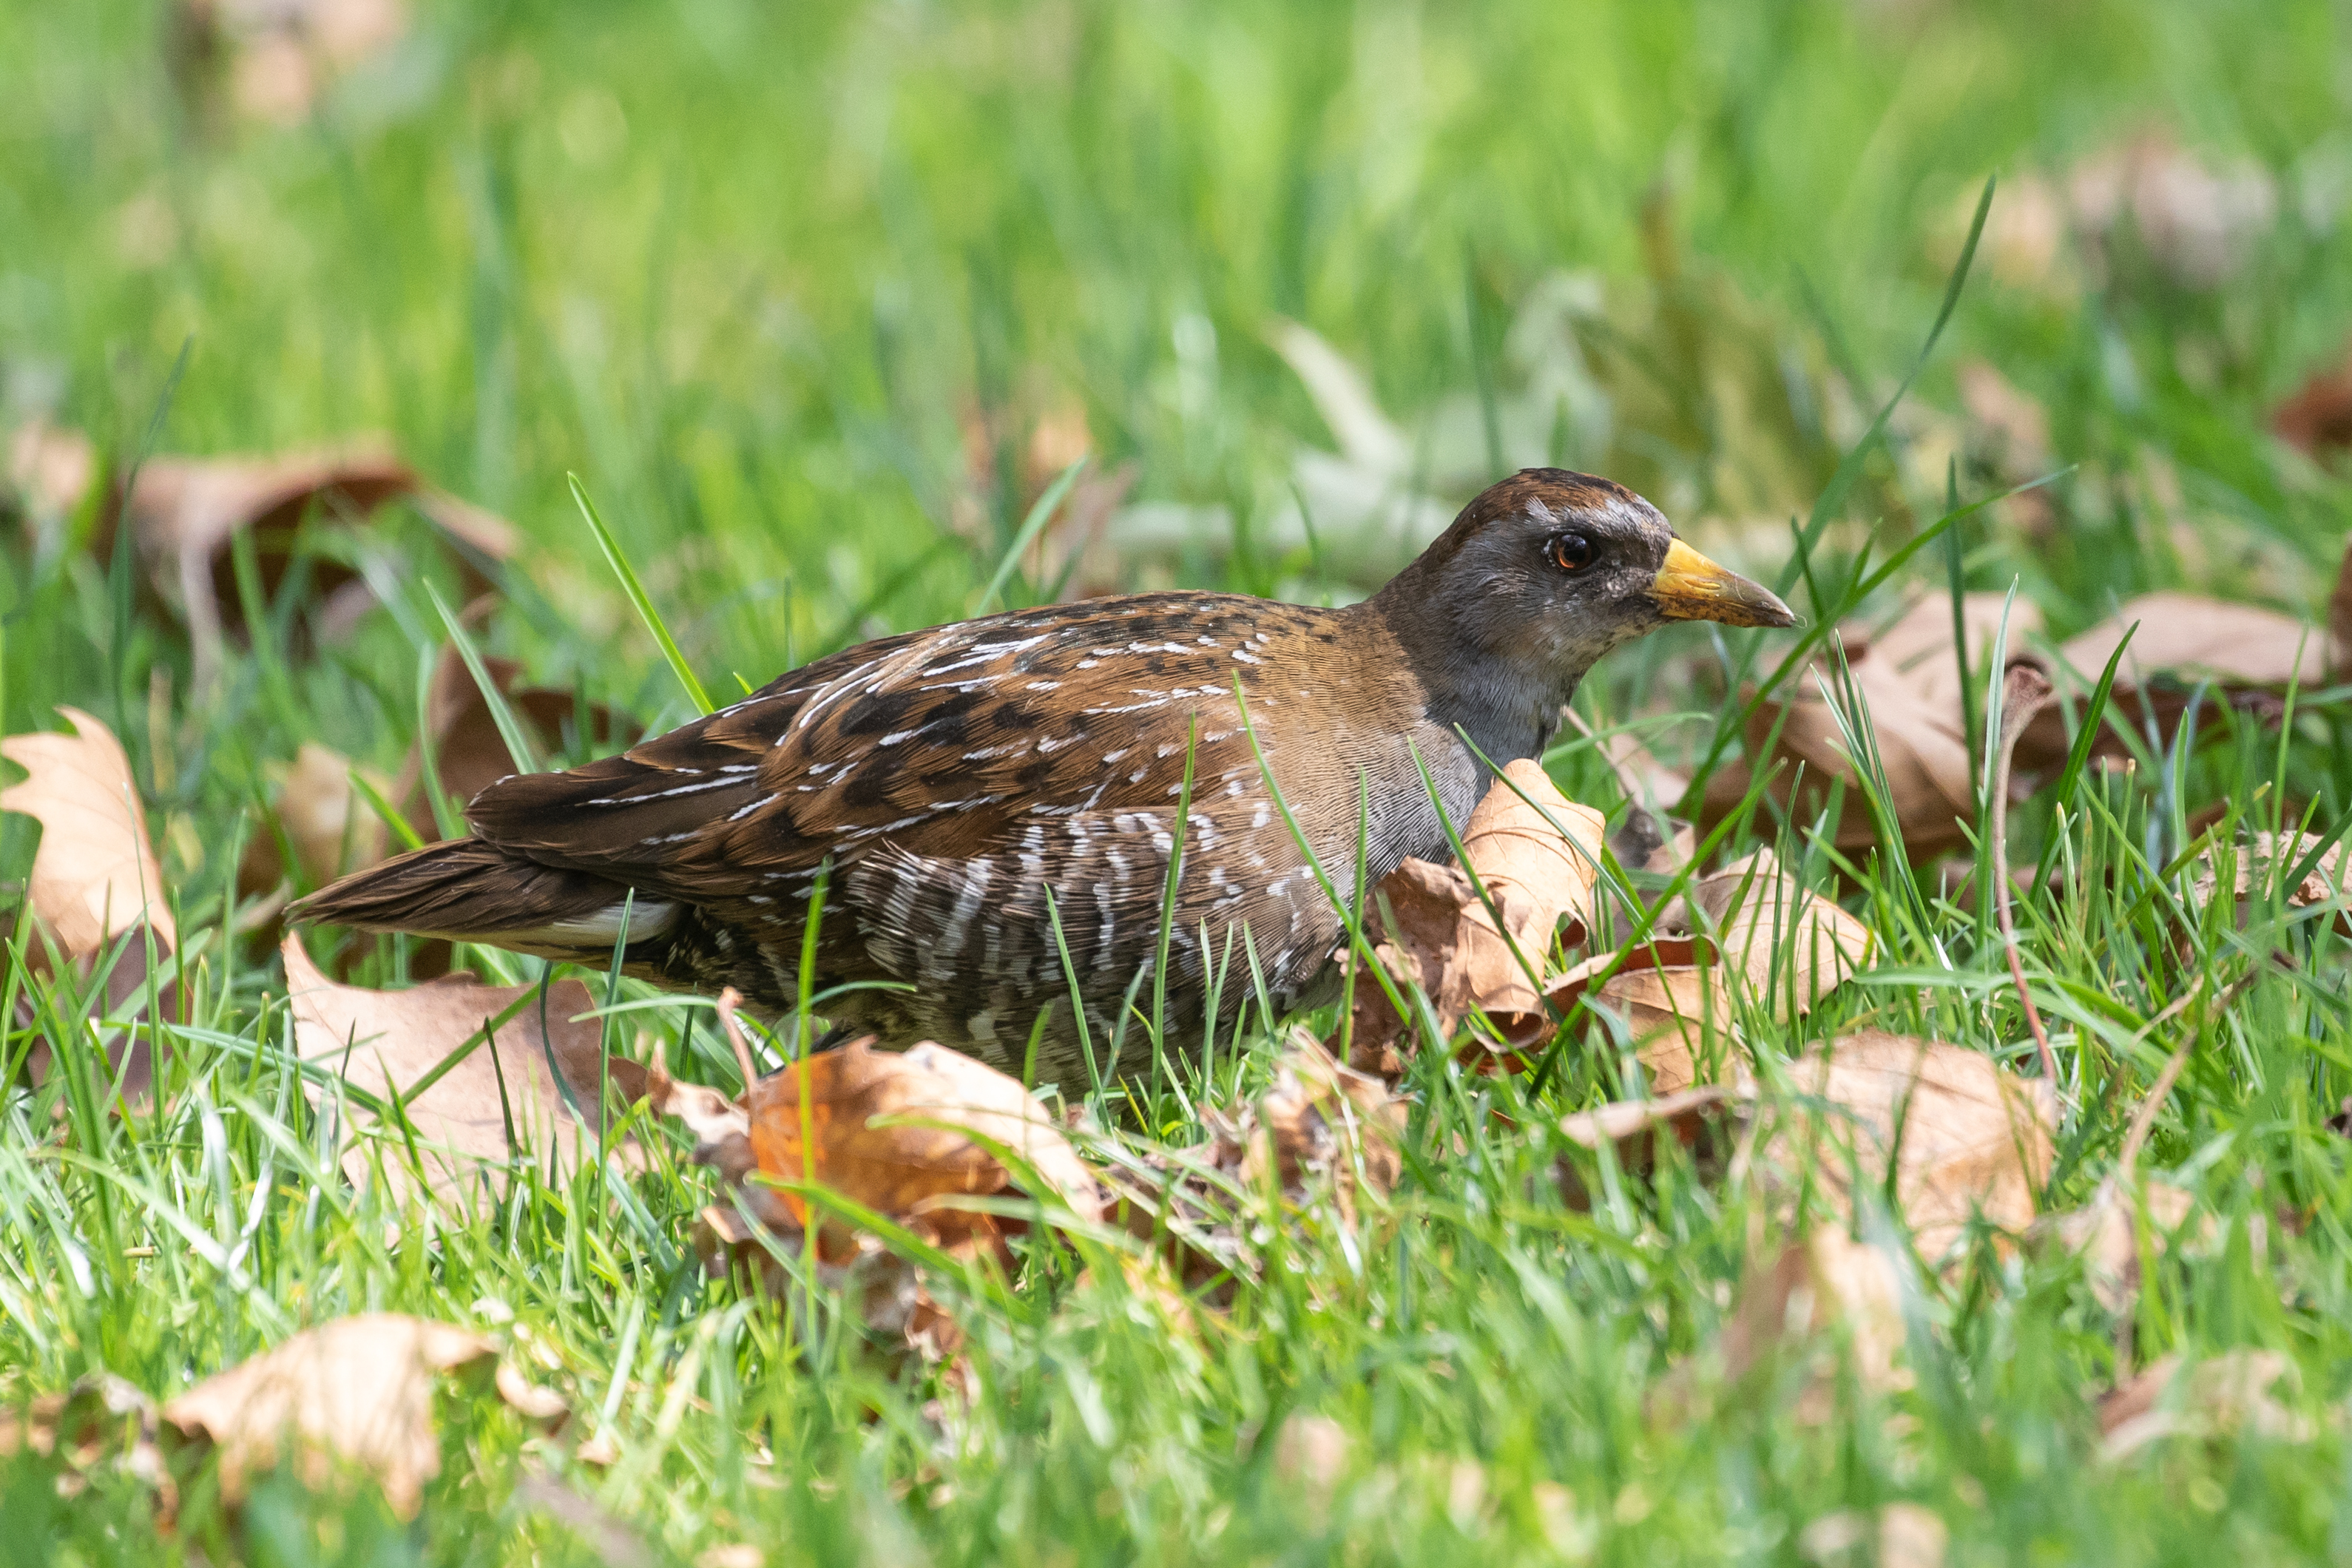 The lawns of Madison Square Park sometimes offer great views of unusual species, such as this Sora. Photo: Ryan F. Mandelbaum